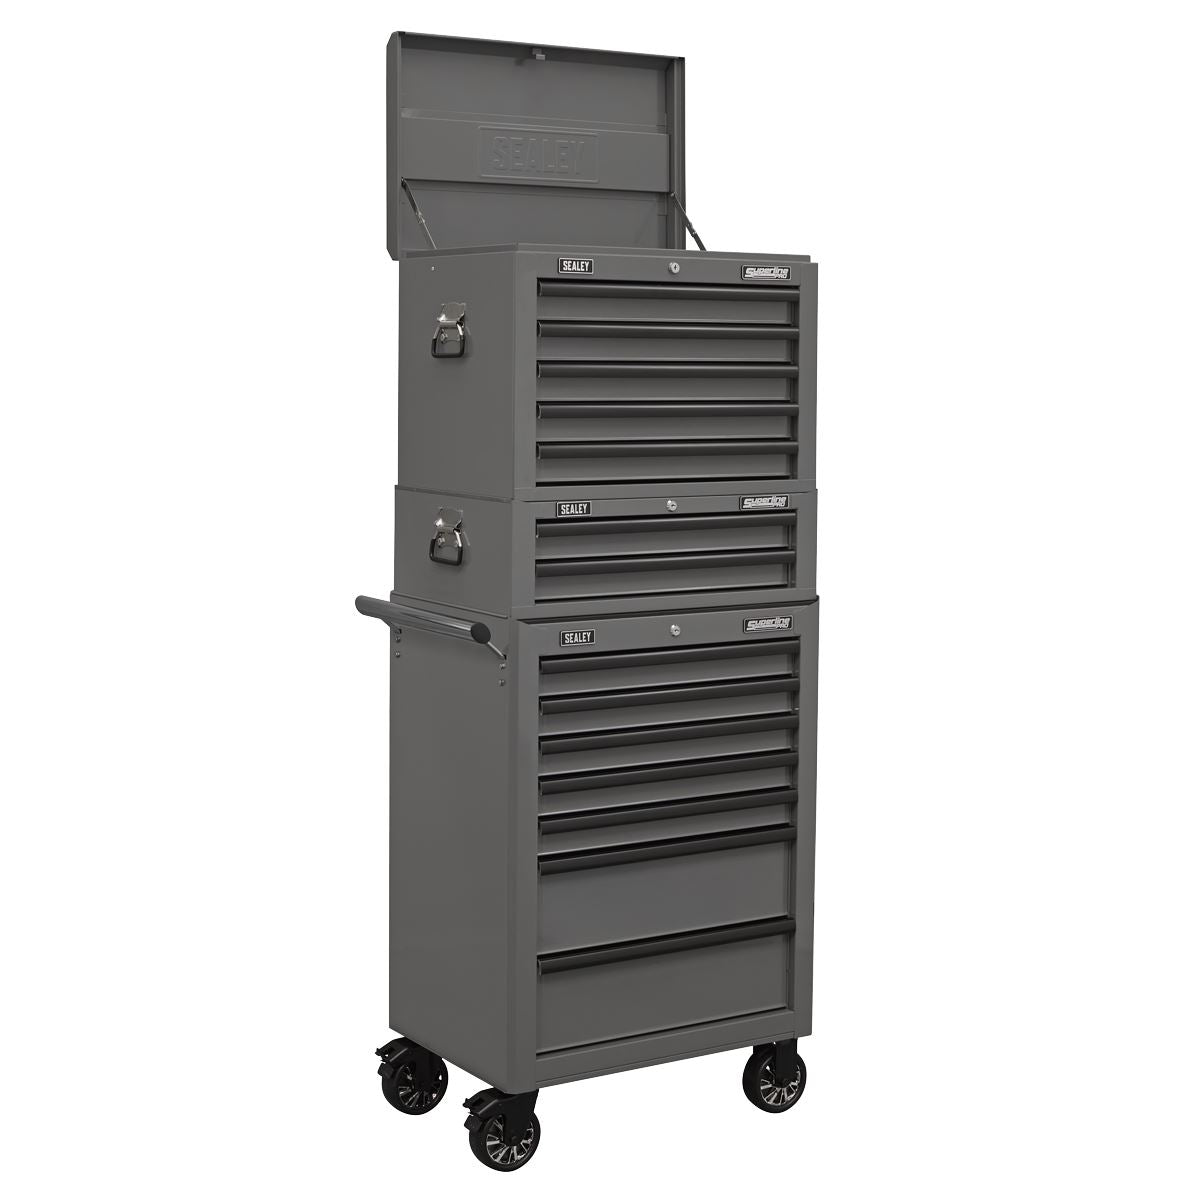 Sealey Superline Pro Topchest, Mid-Box Tool Chest & Rollcab Combination 14 Drawer with Ball-Bearing Slides - Grey